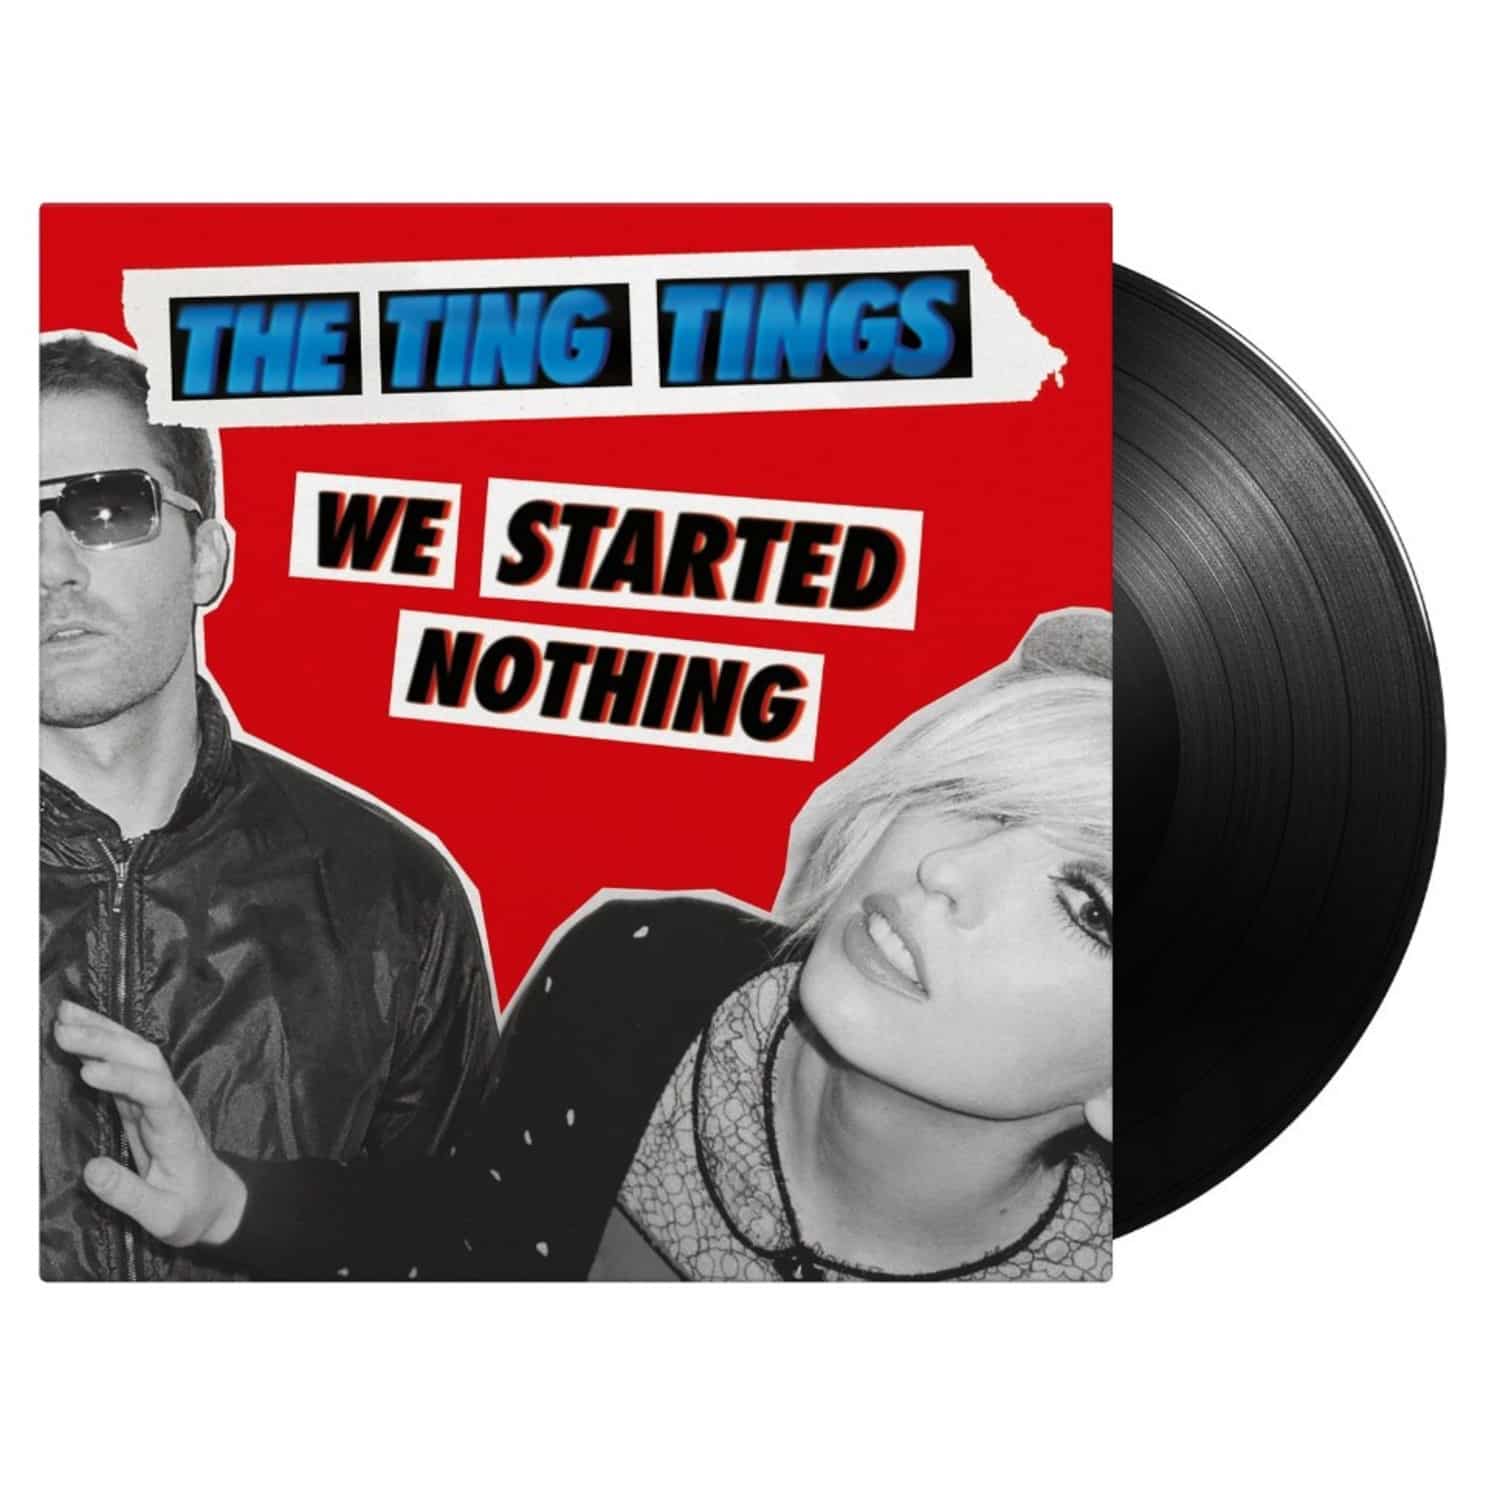 The Ting Tings - WE STARTED NOTHING